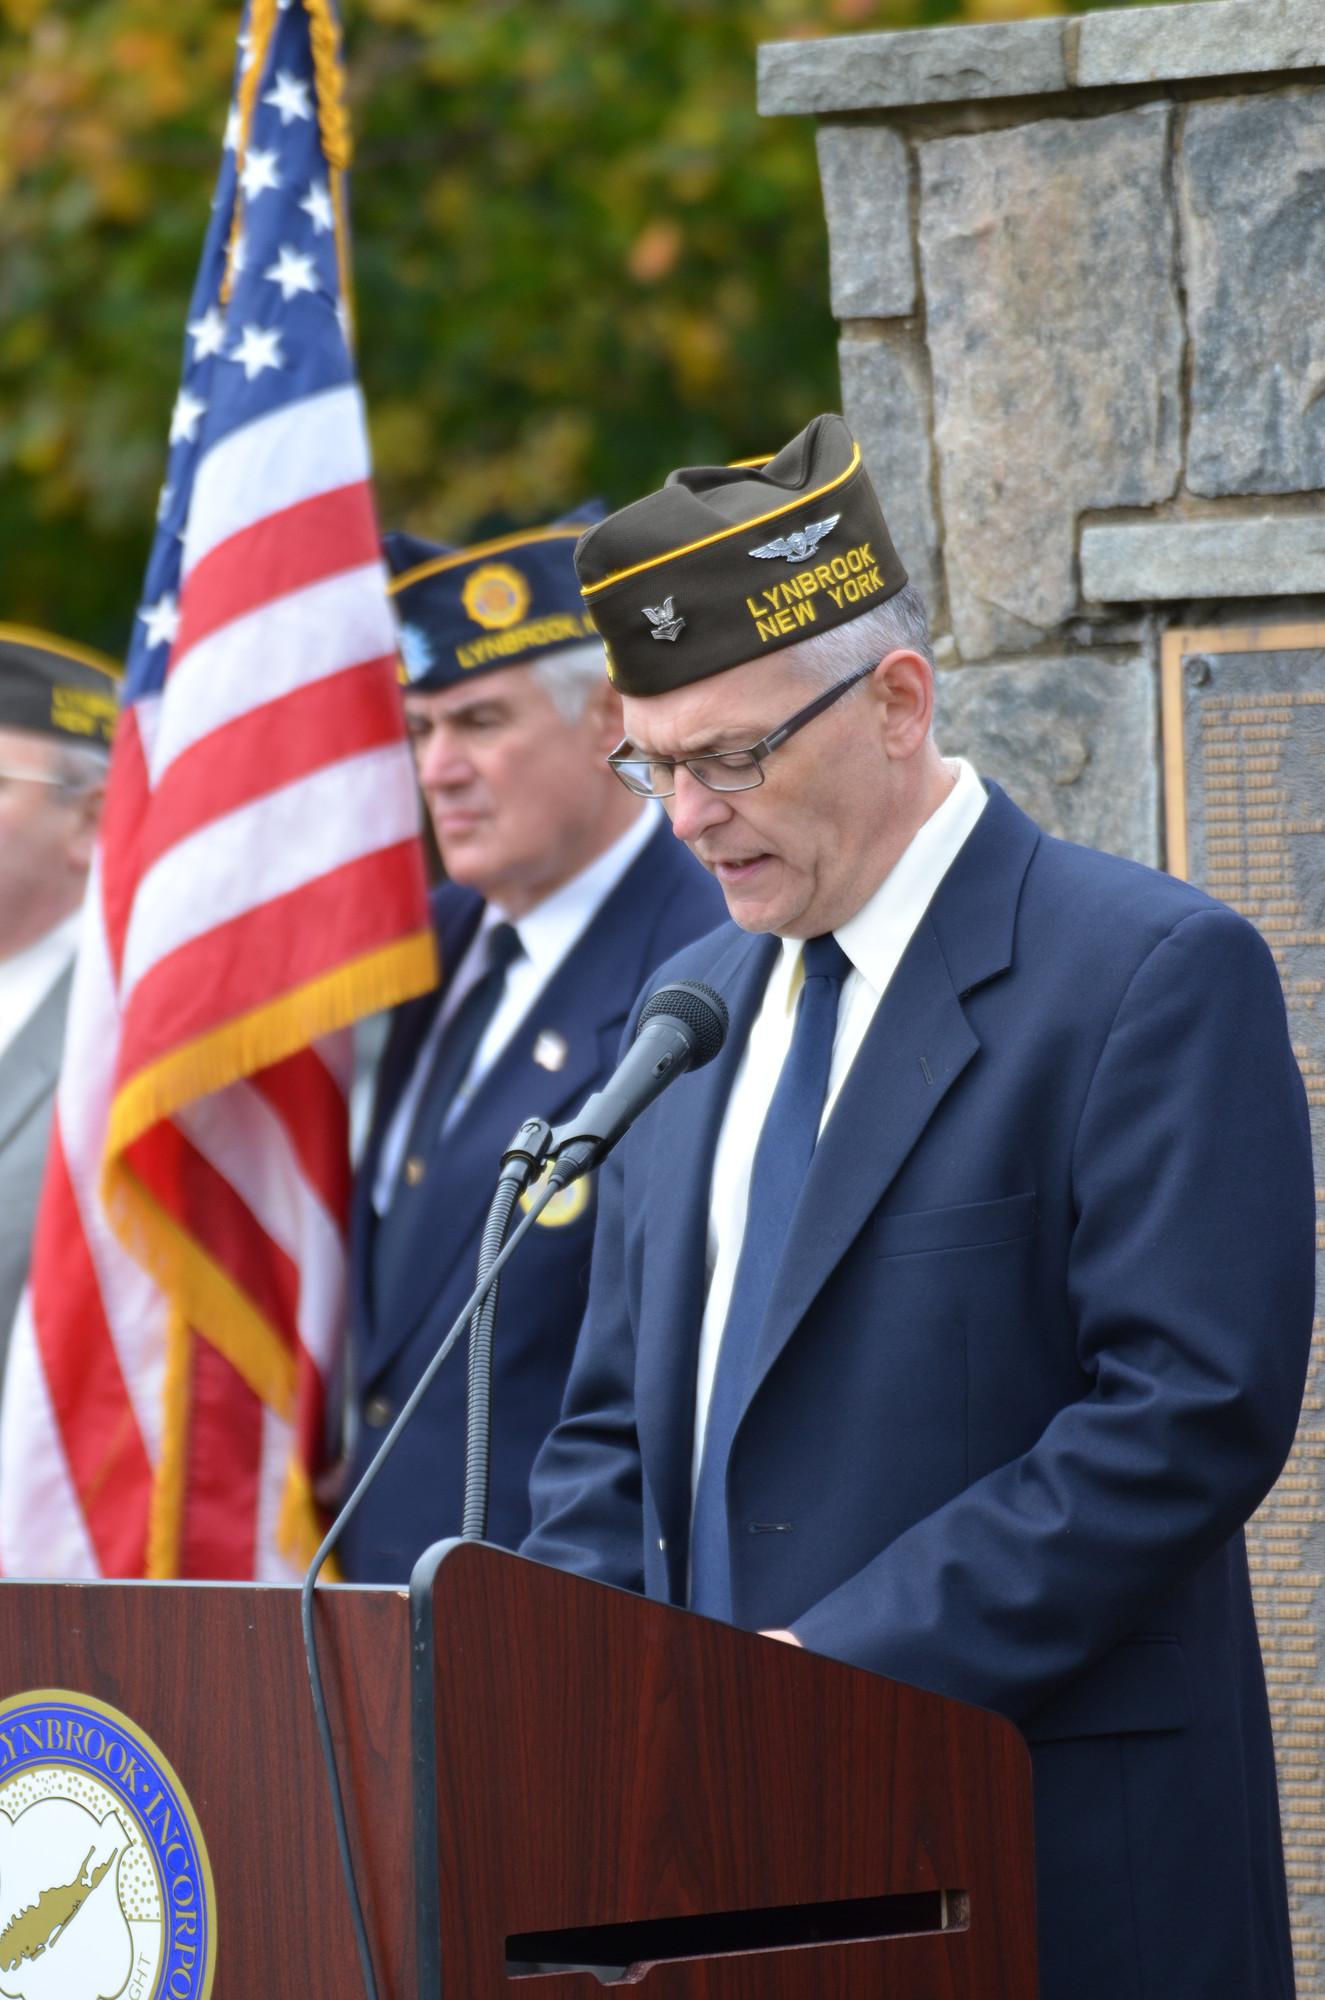 Patrick Nealon, commander of the Lynbrook Veterans of Foreign Wars, spoke to the crowd.